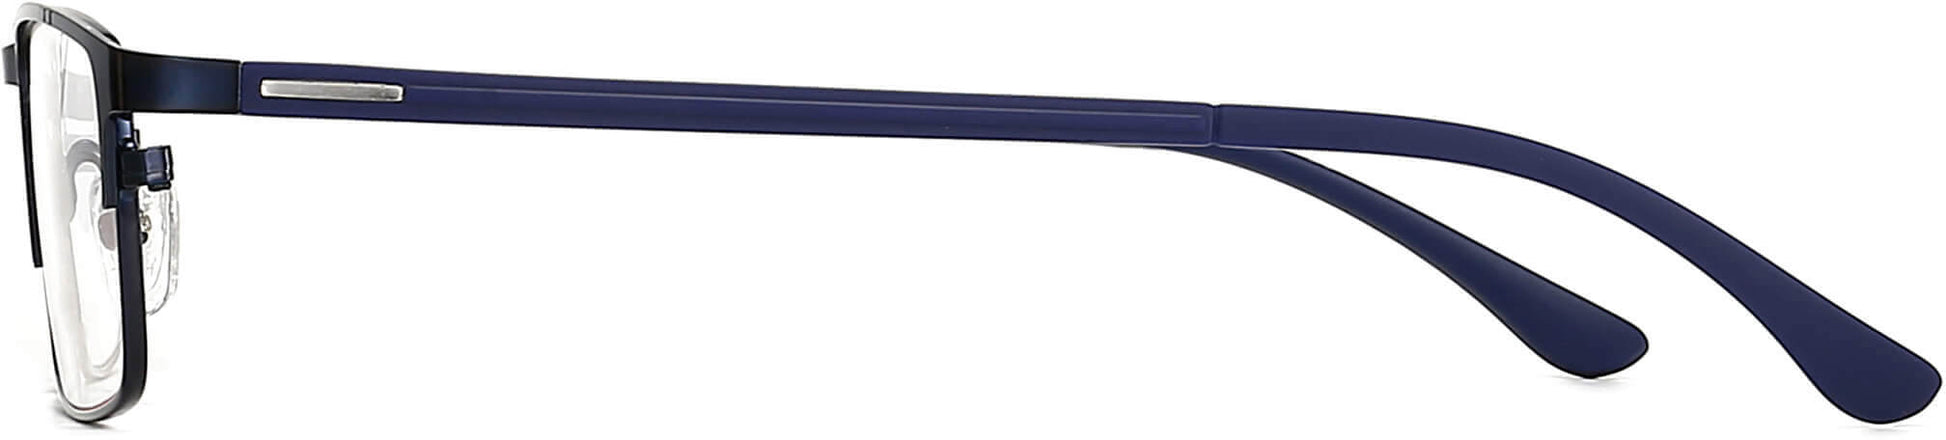 Trent Rectangle Blue Eyeglasses from ANRRI, side view